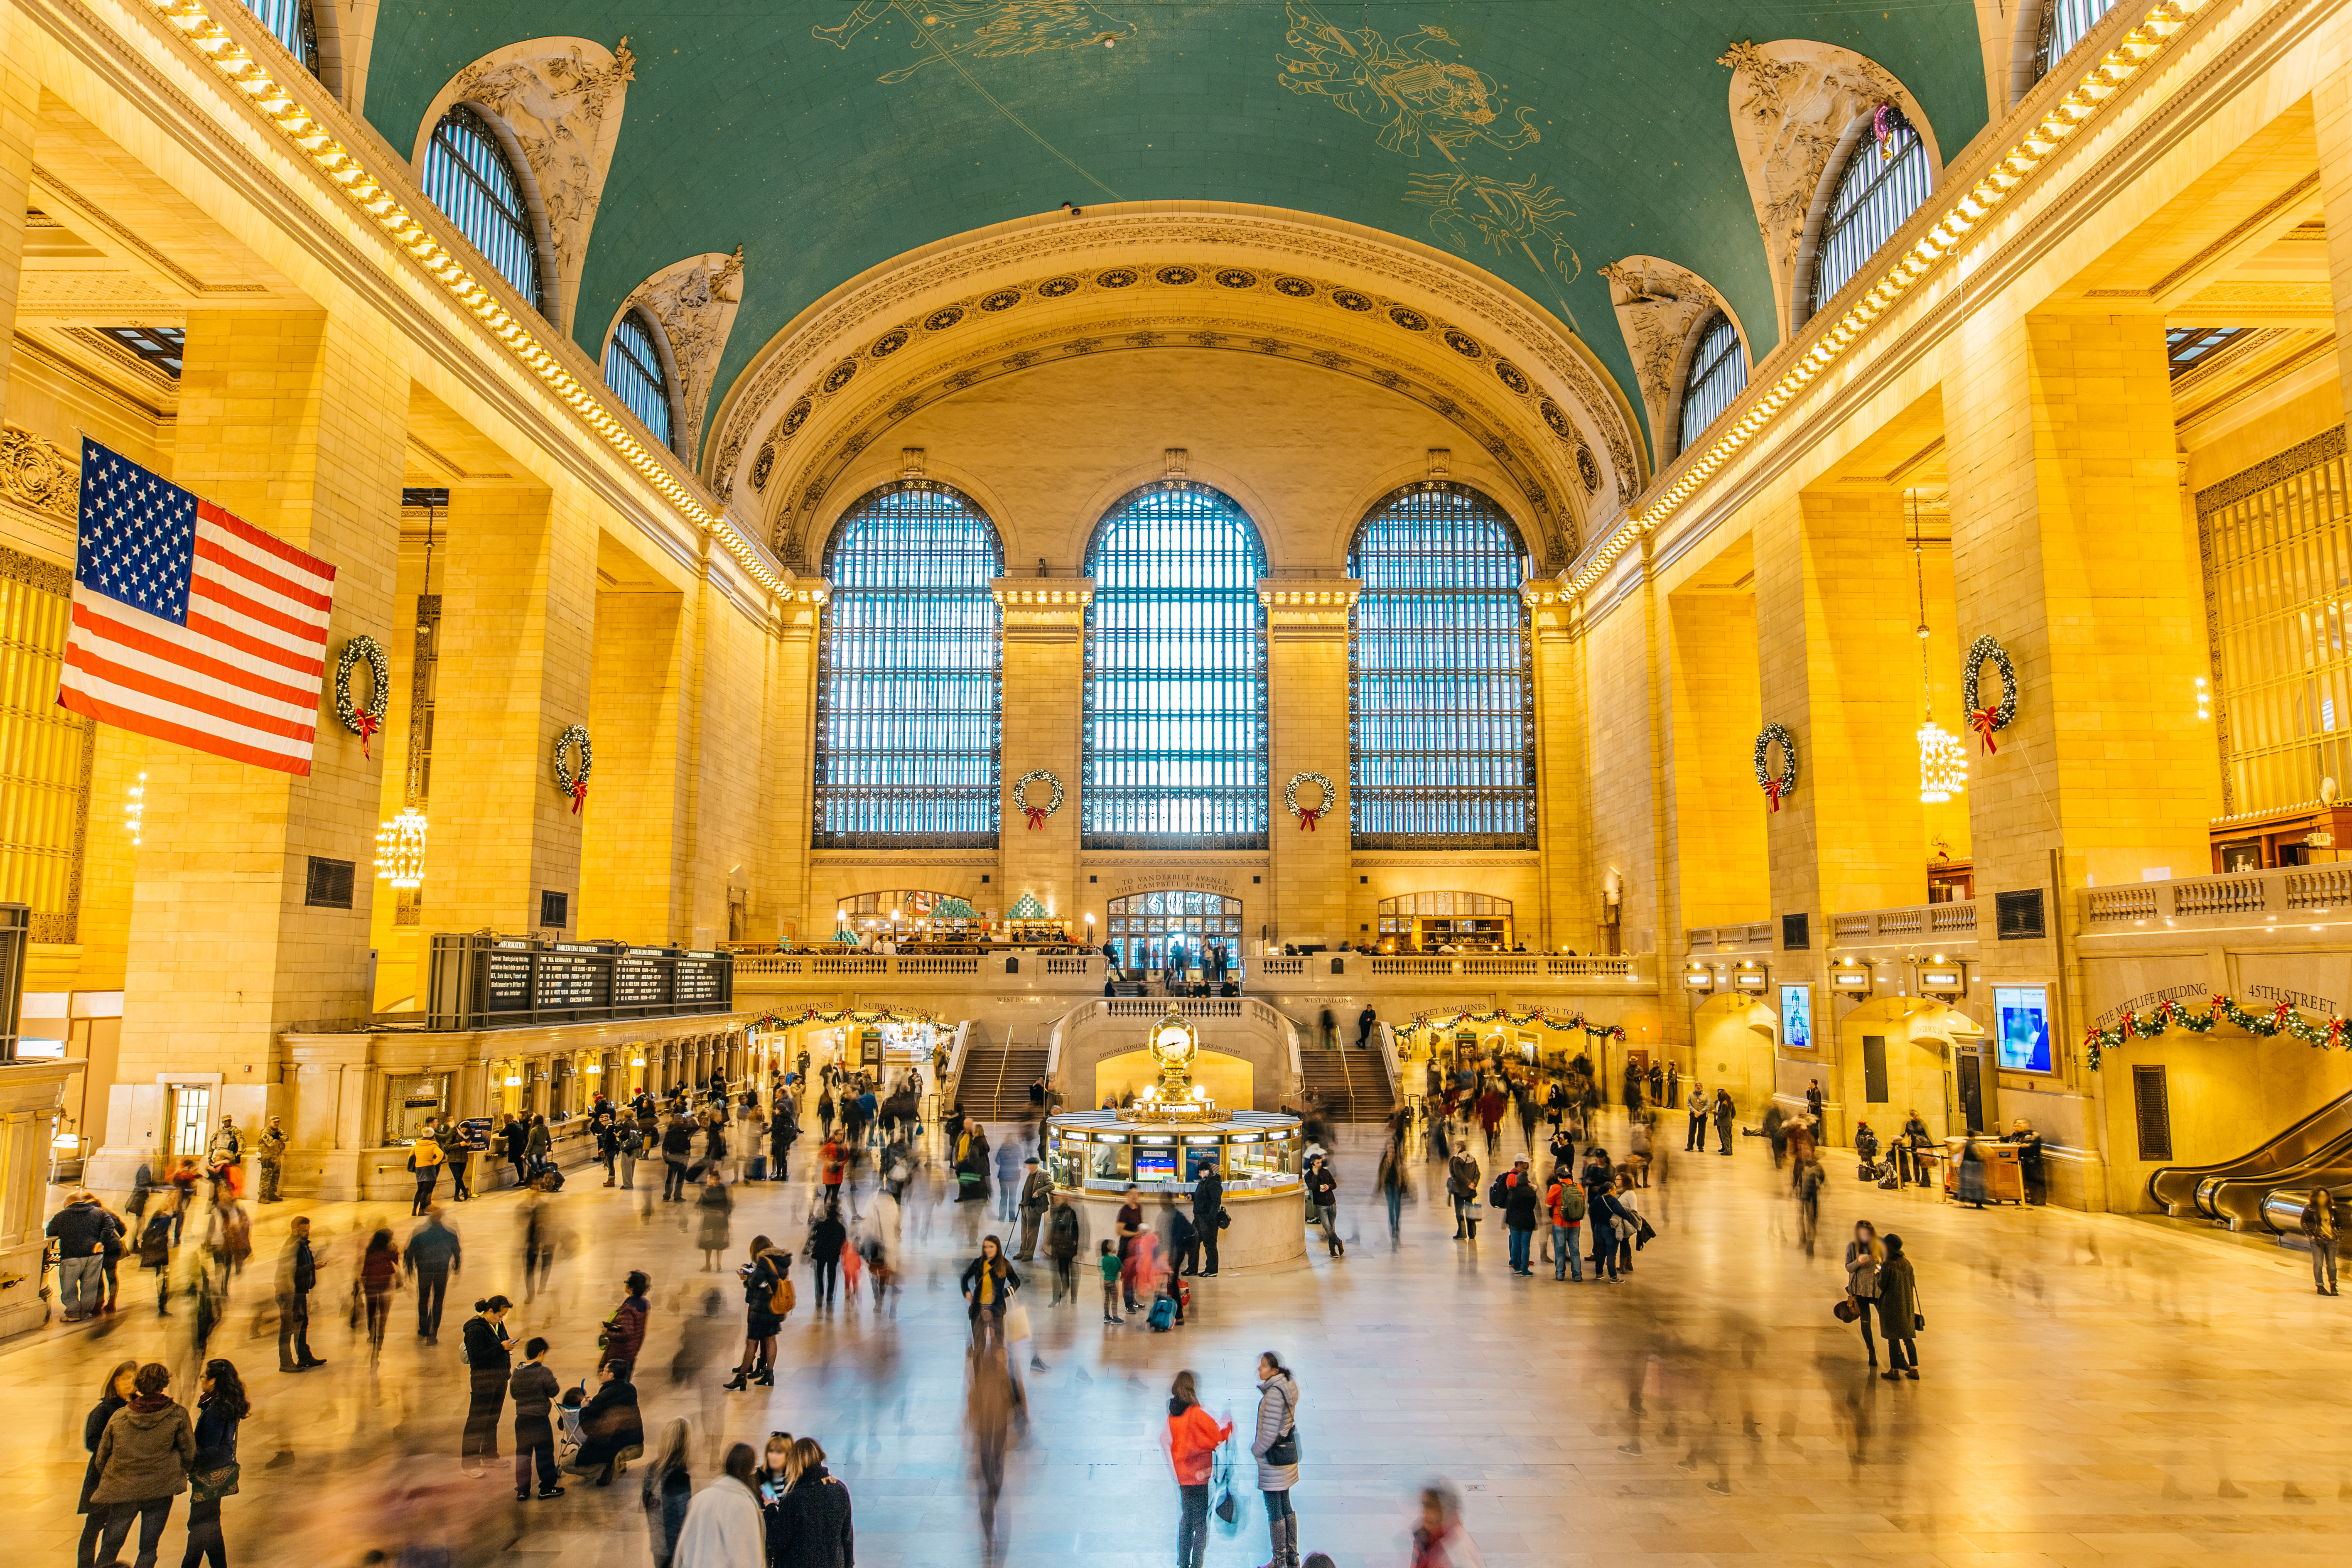 The main grand central terminal with a golden vaulted ceiling with green paint. Some people are seen walking inside the terminal.